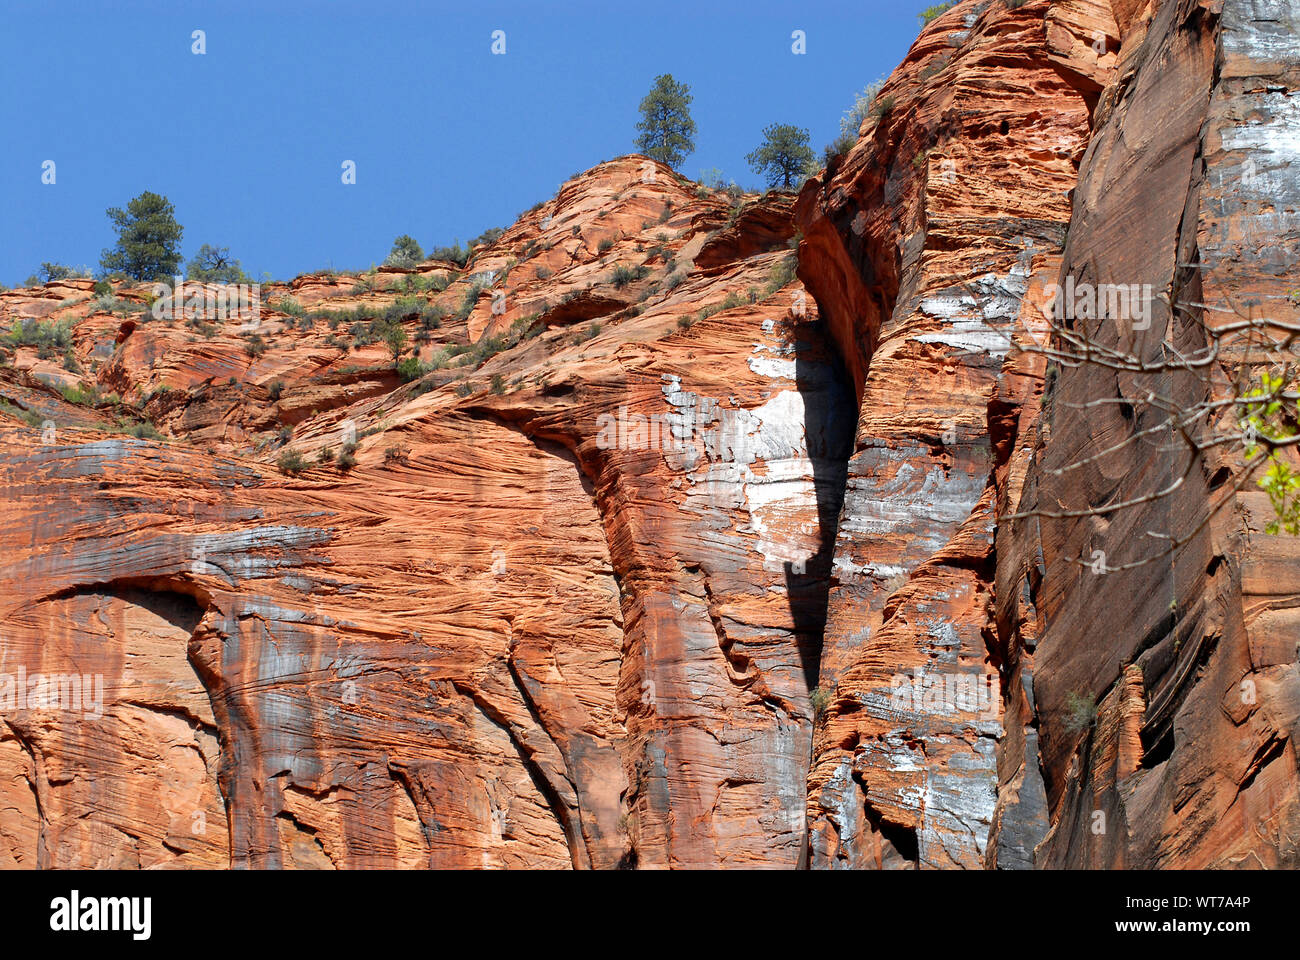 Volcanic upheaval and natural erosion have created amazing patterns in the cliffs of Zion National Park, Utah, USA Stock Photo